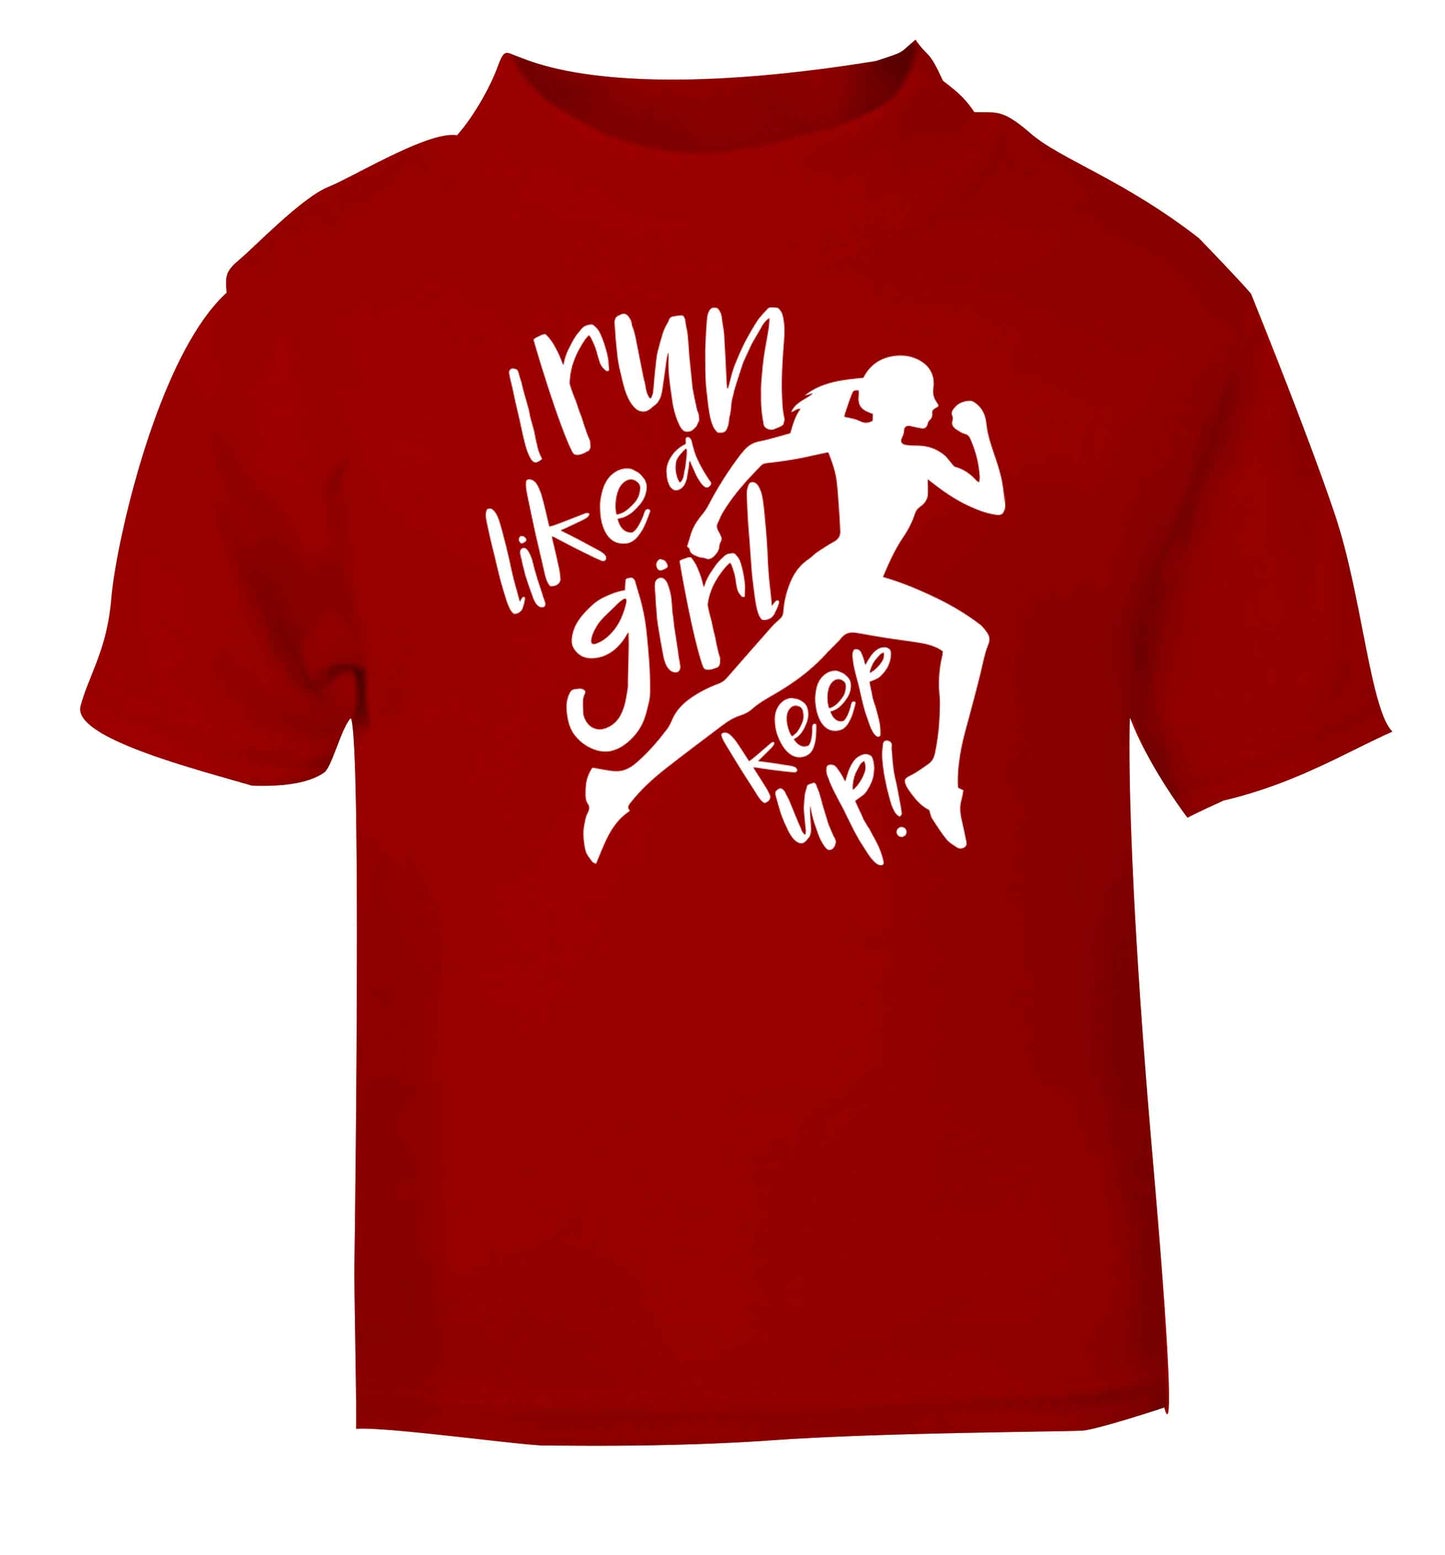 I run like a girl, keep up! red baby toddler Tshirt 2 Years